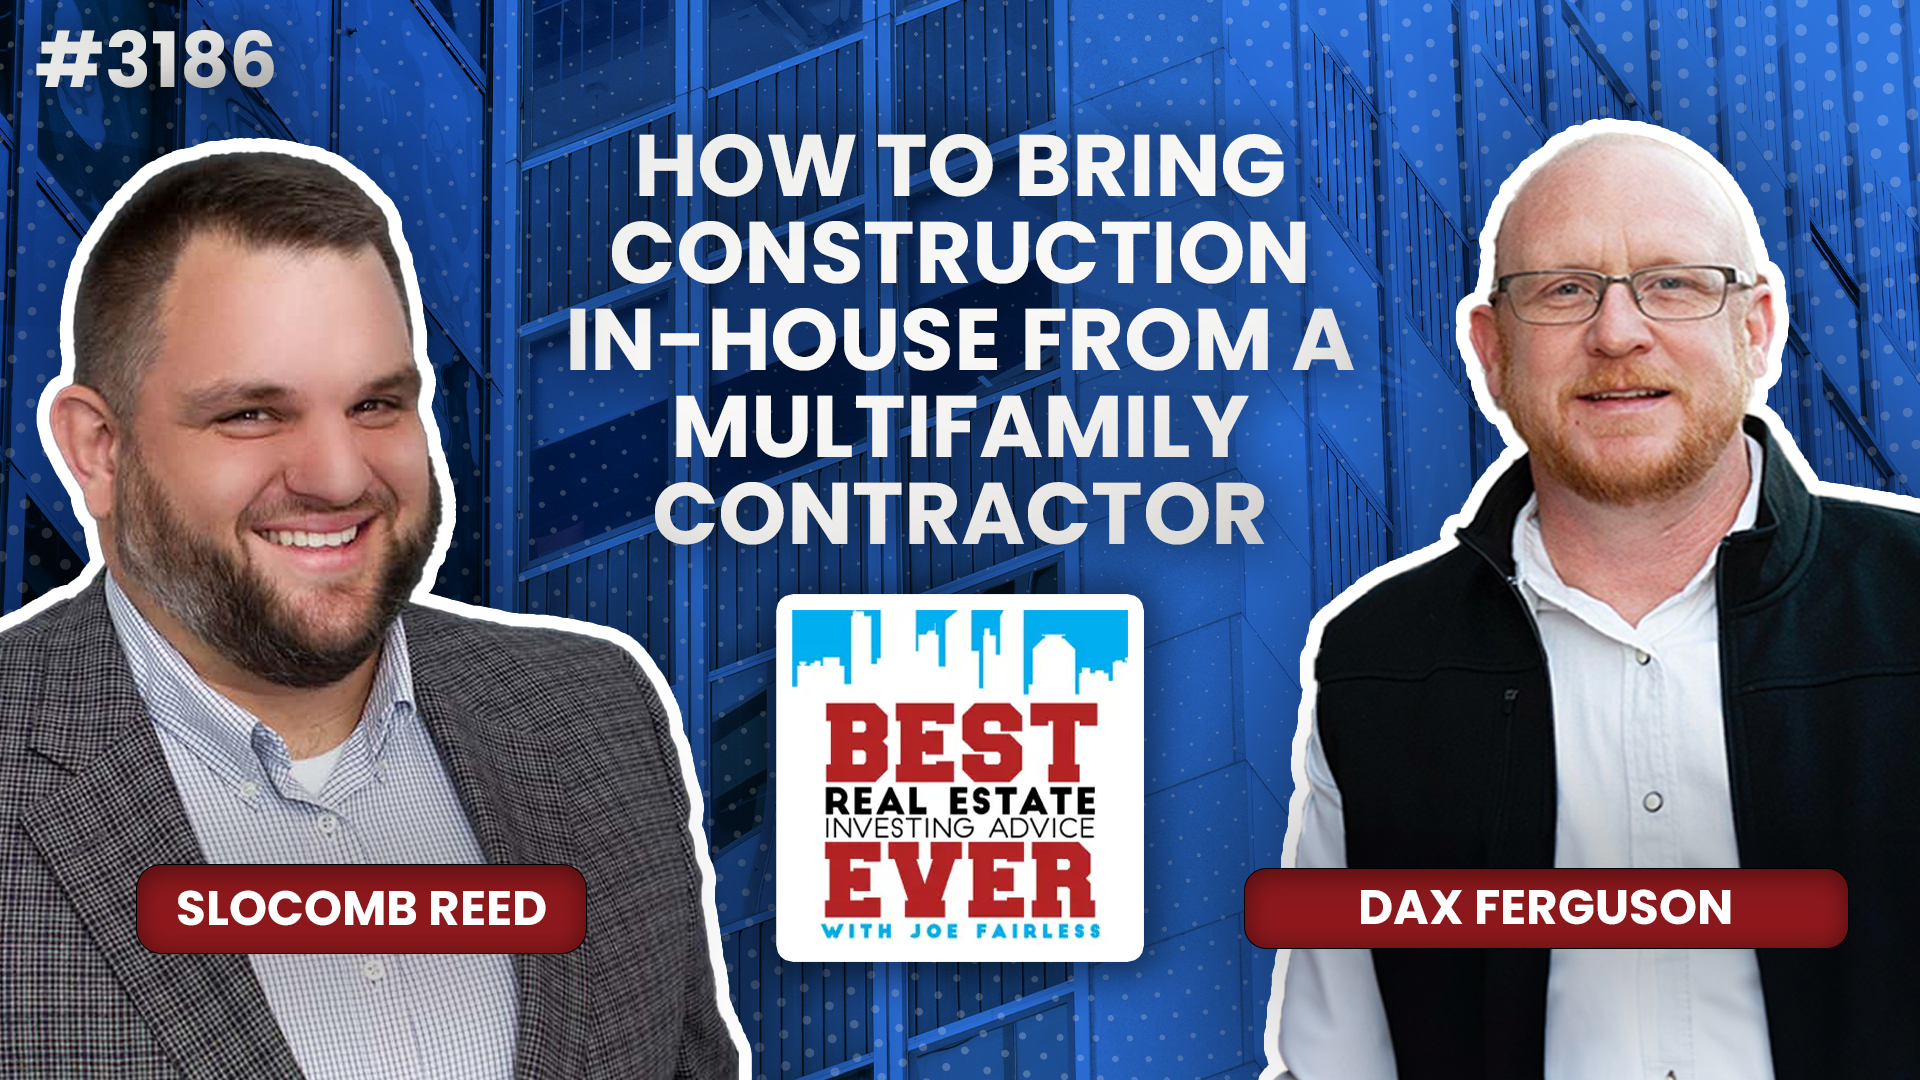 JF3186: How to Bring Construction In-House from a Multifamily Contractor ft. Dax Ferguson